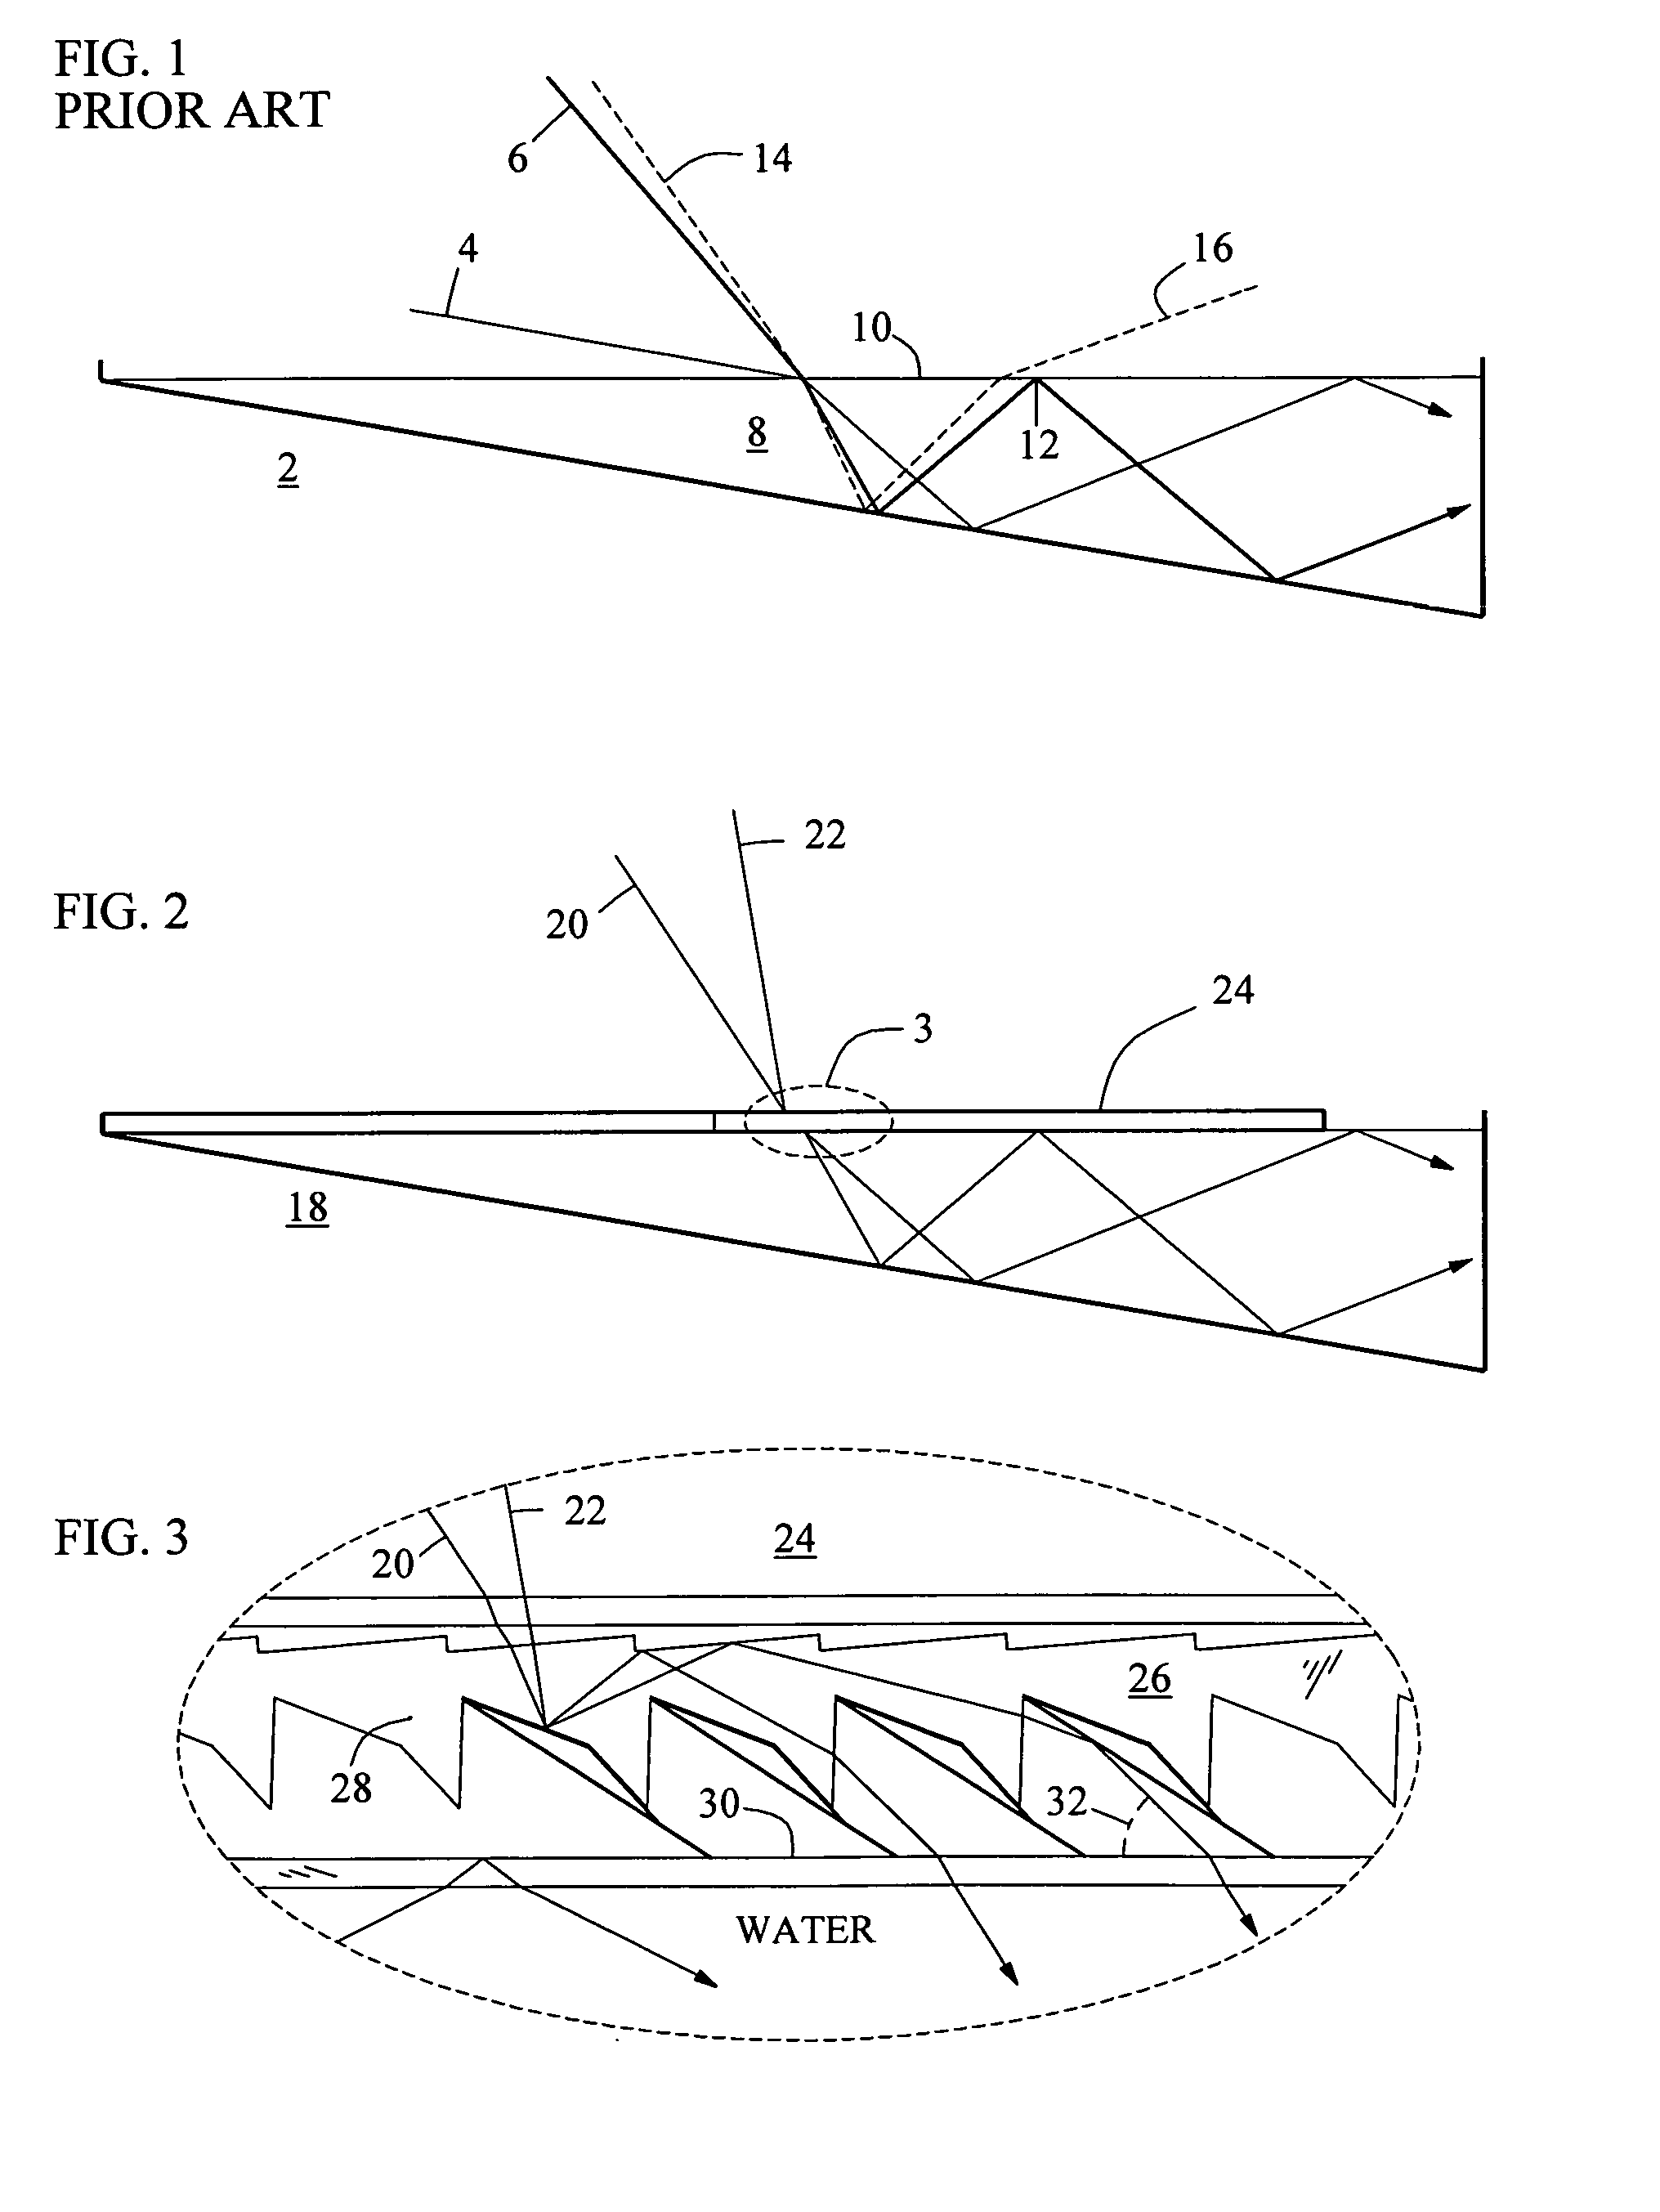 Collection optic for solar concentrating wedge